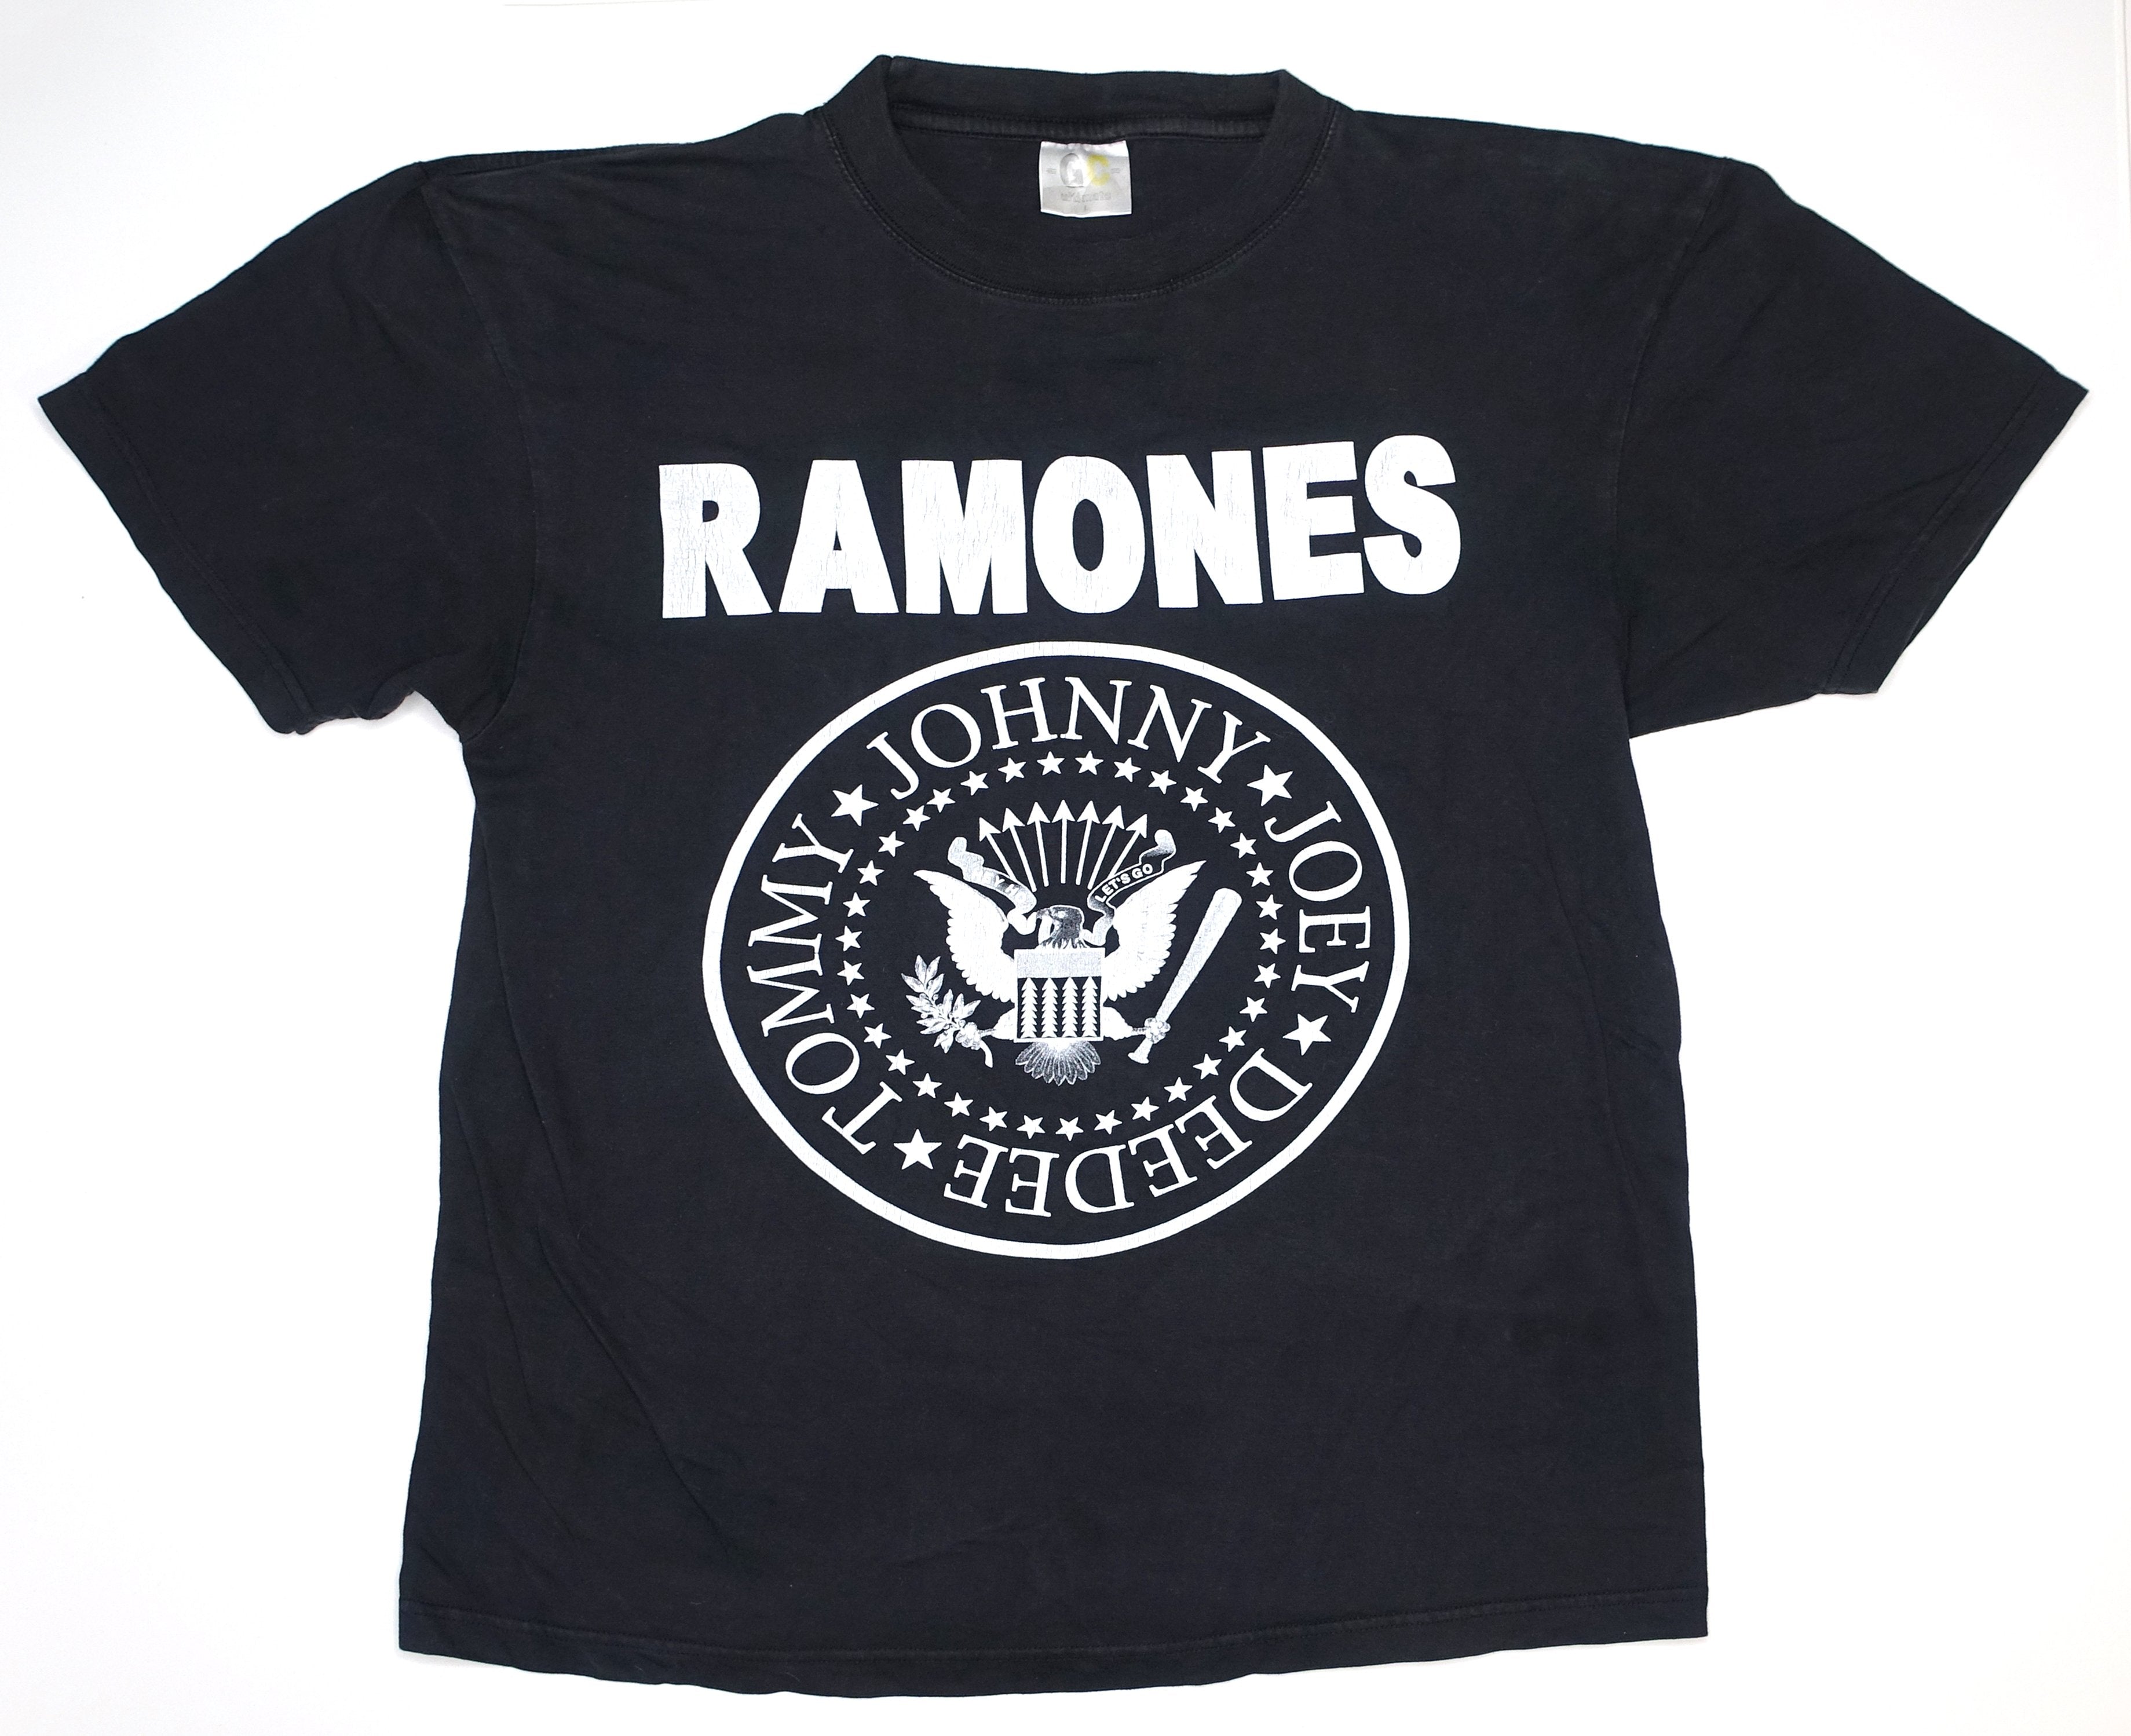 the Ramones - Hey Ho Let's Go 1995 90's Shirt Size Large